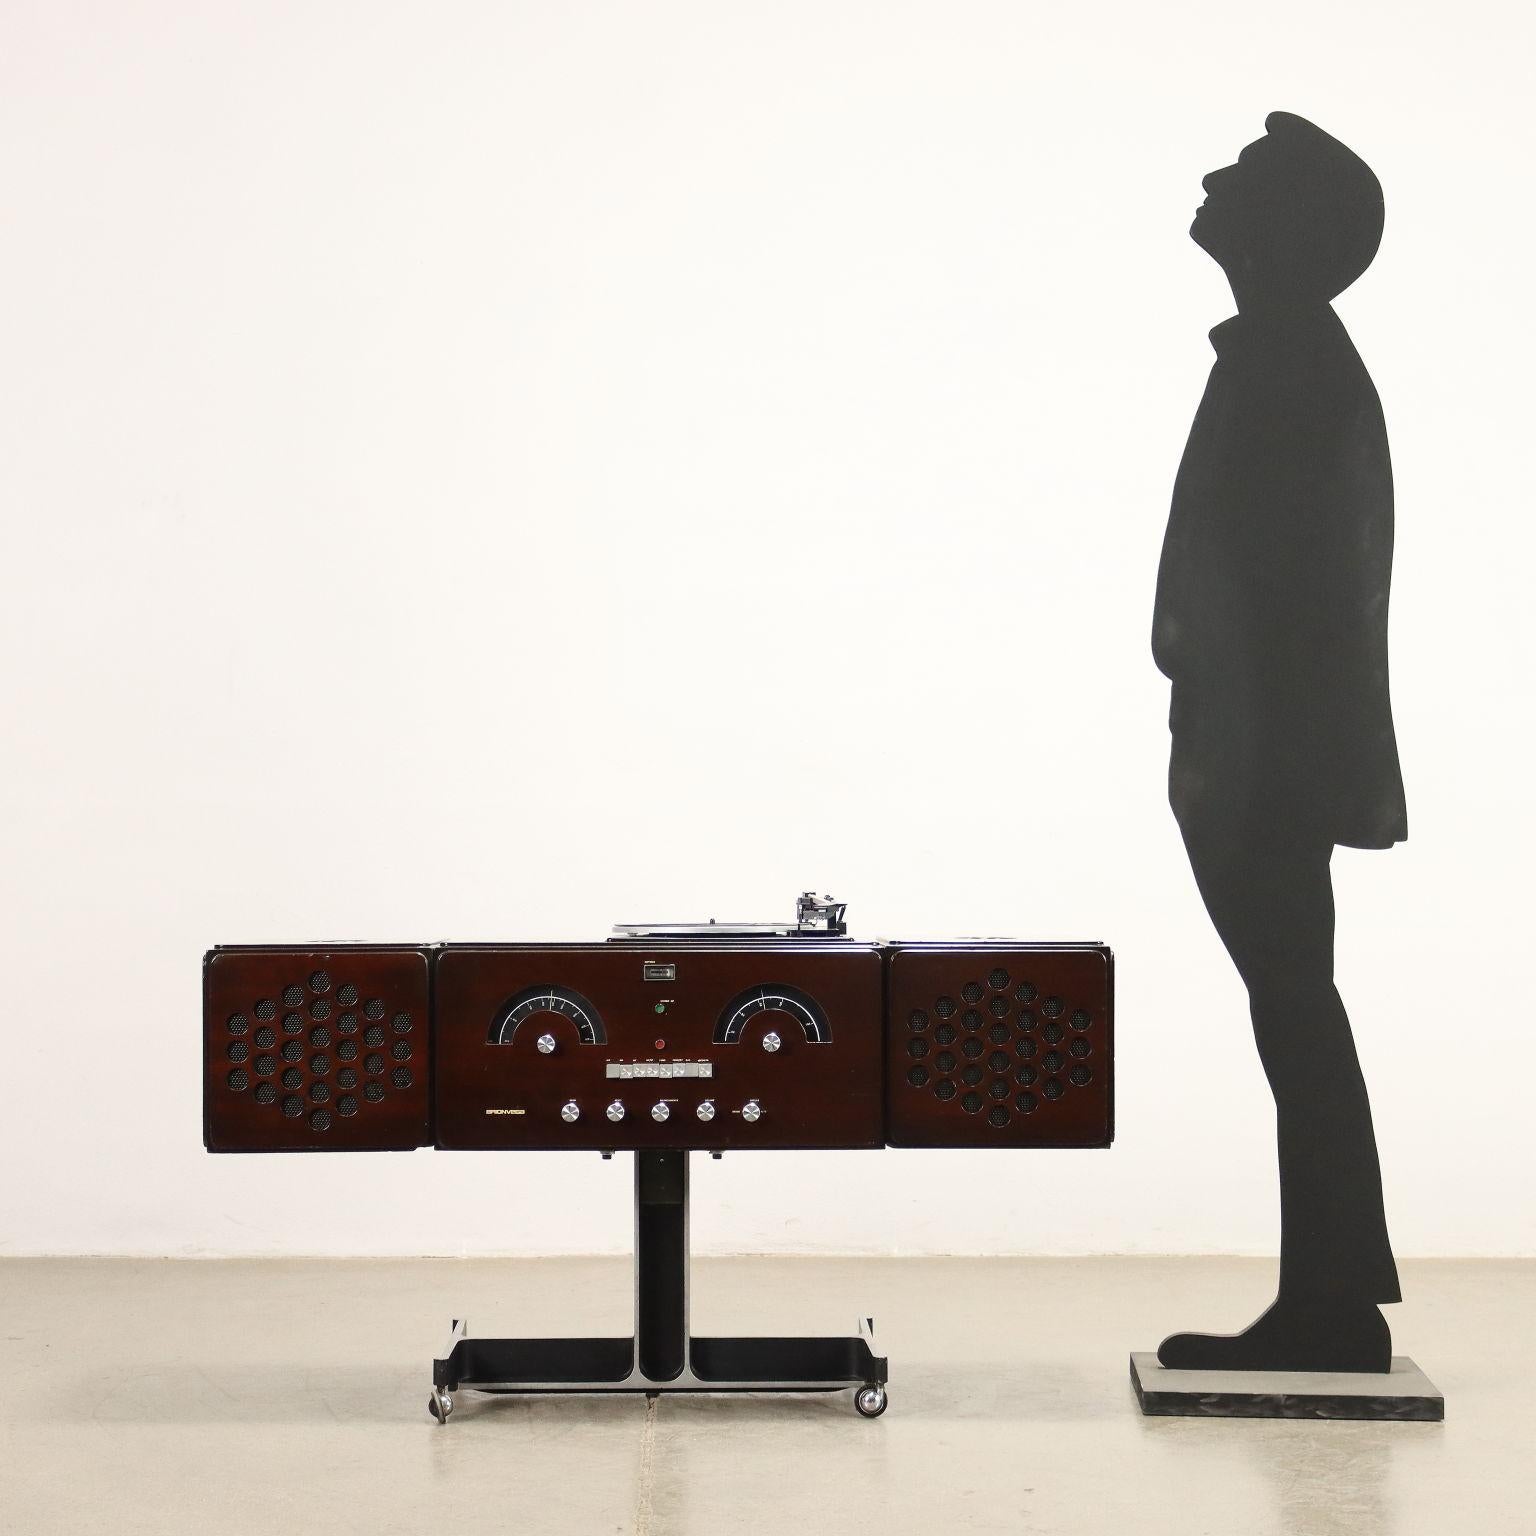 Iconic Radiophonograph designed by brothers Achille and Pier Giacomo Castiglioni, with body and cases in wood and support in cast aluminum. The case is missed.